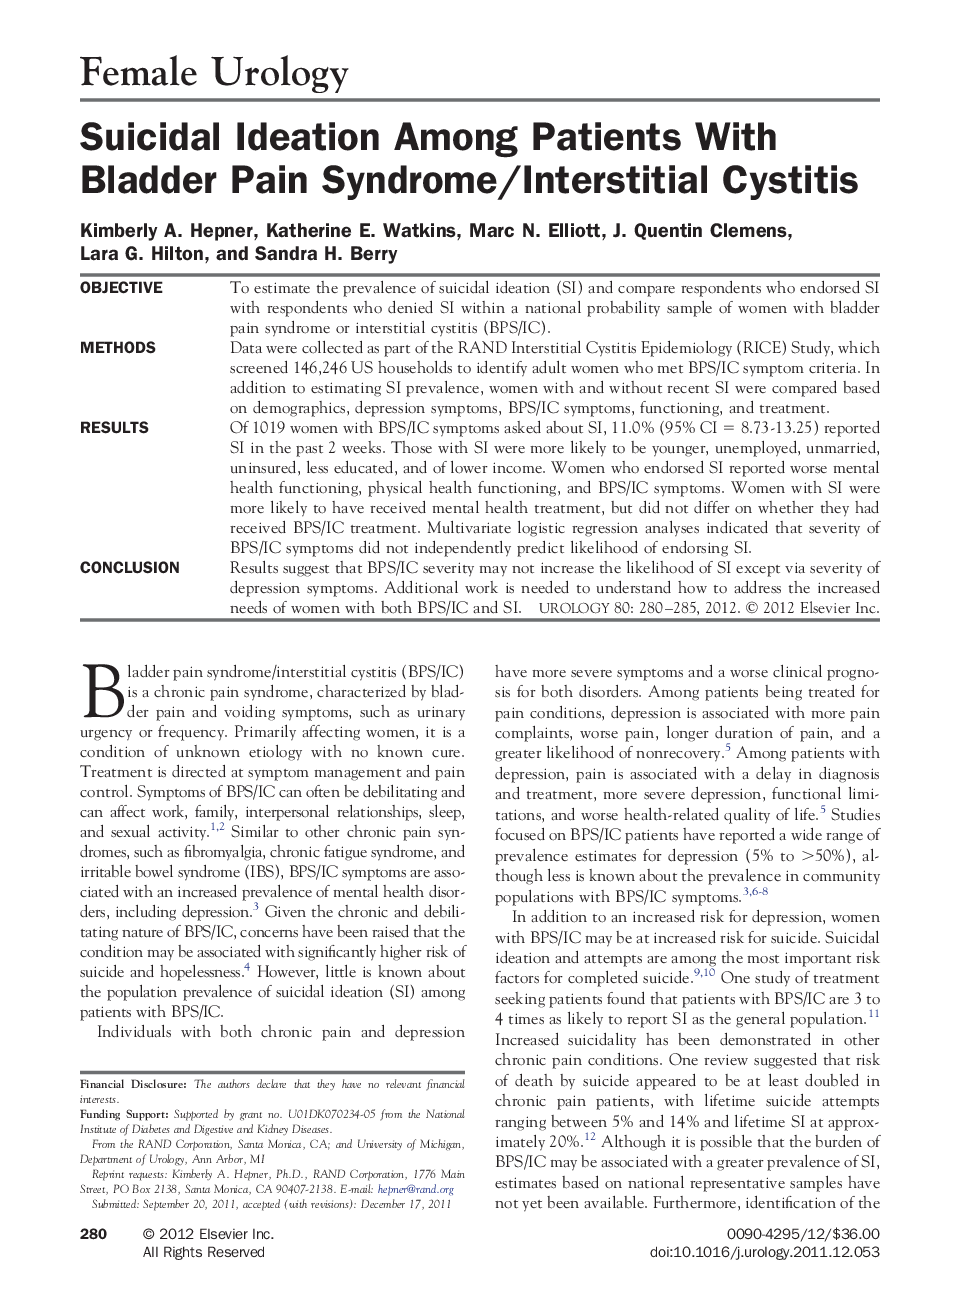 Suicidal Ideation Among Patients With Bladder Pain Syndrome/Interstitial Cystitis 